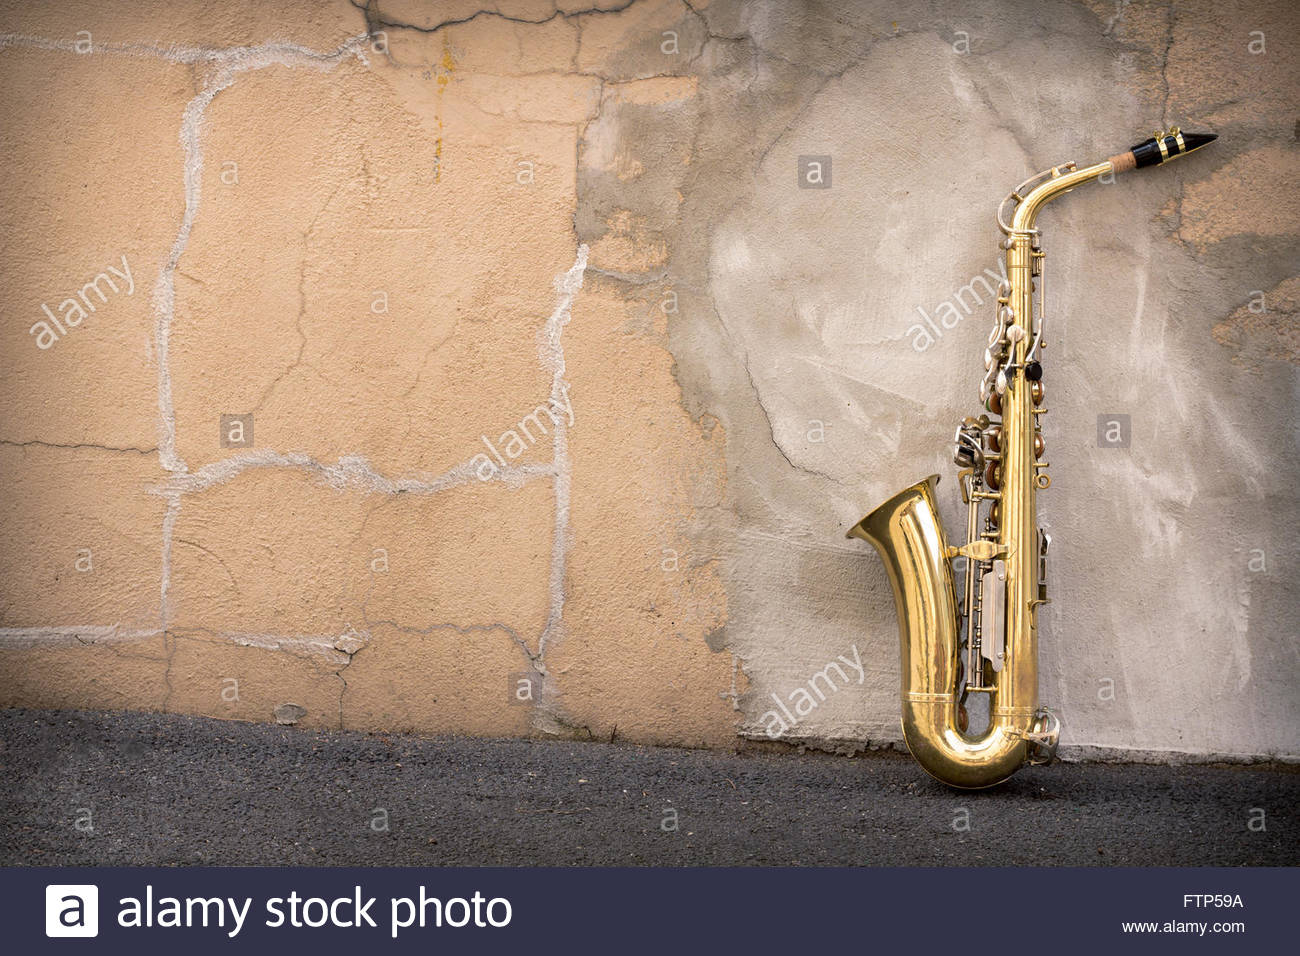 Jazz Musical Instrument Saxophone With Grungy Street Background